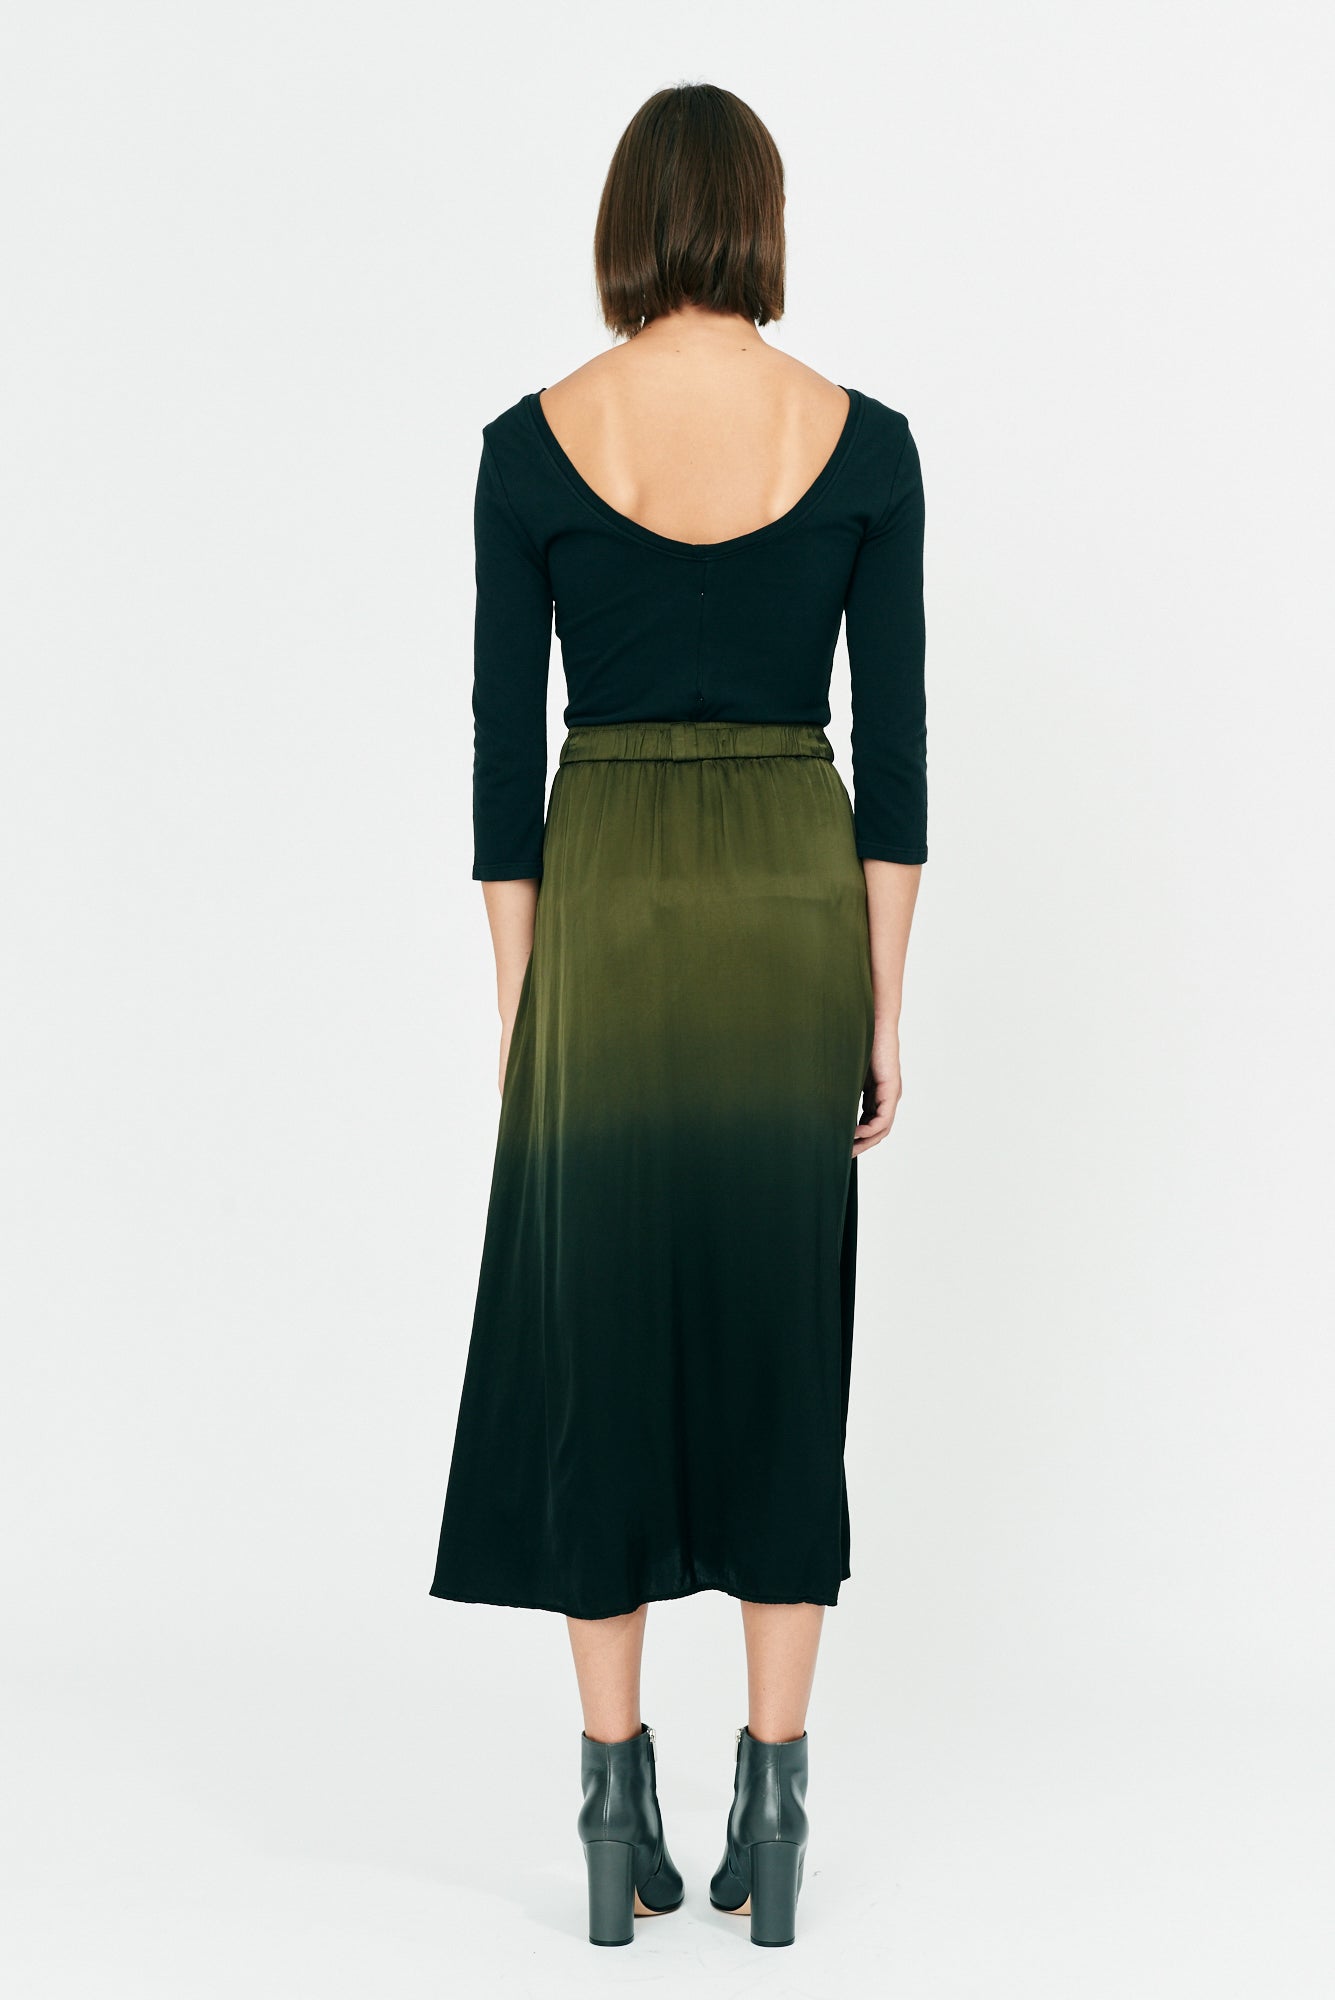 Forest Gradient Ghost Ranch Matte Satin Lily Skirt Full Back View